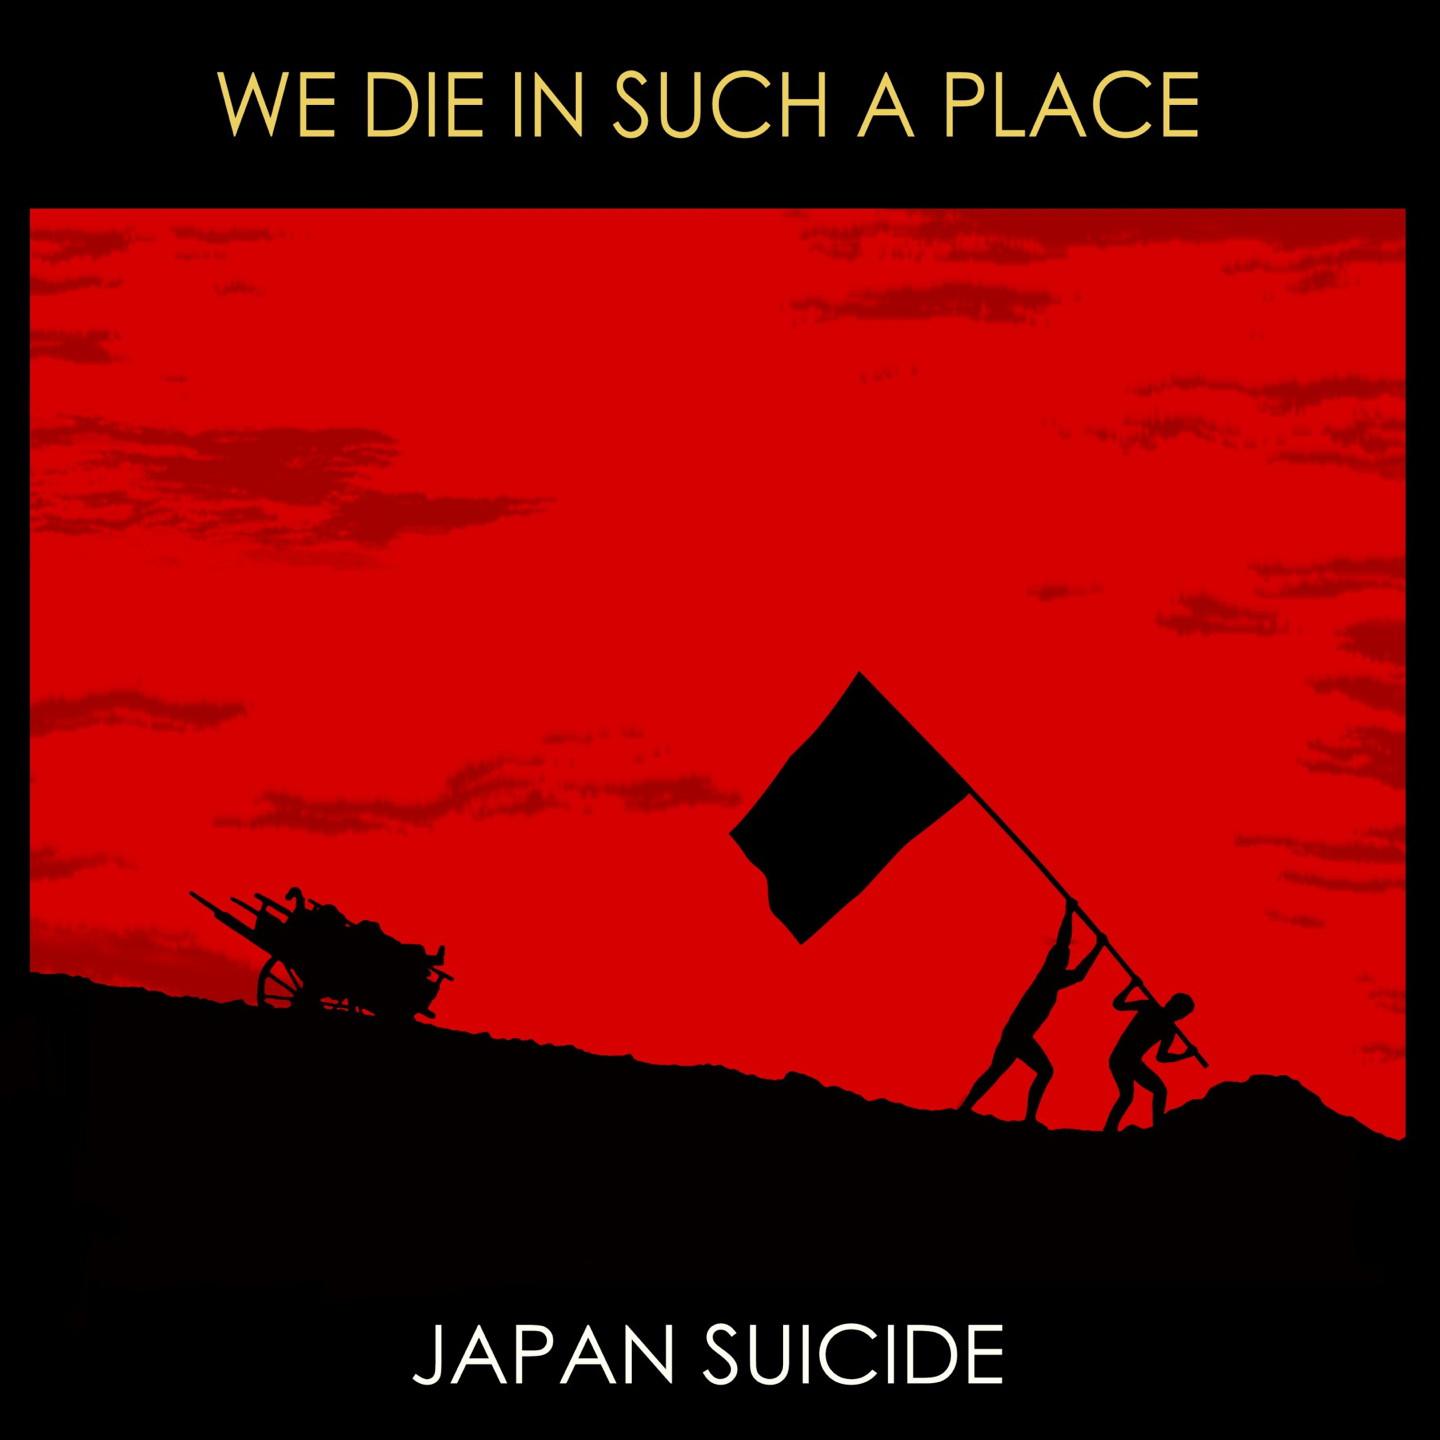 We Die in Such a Place